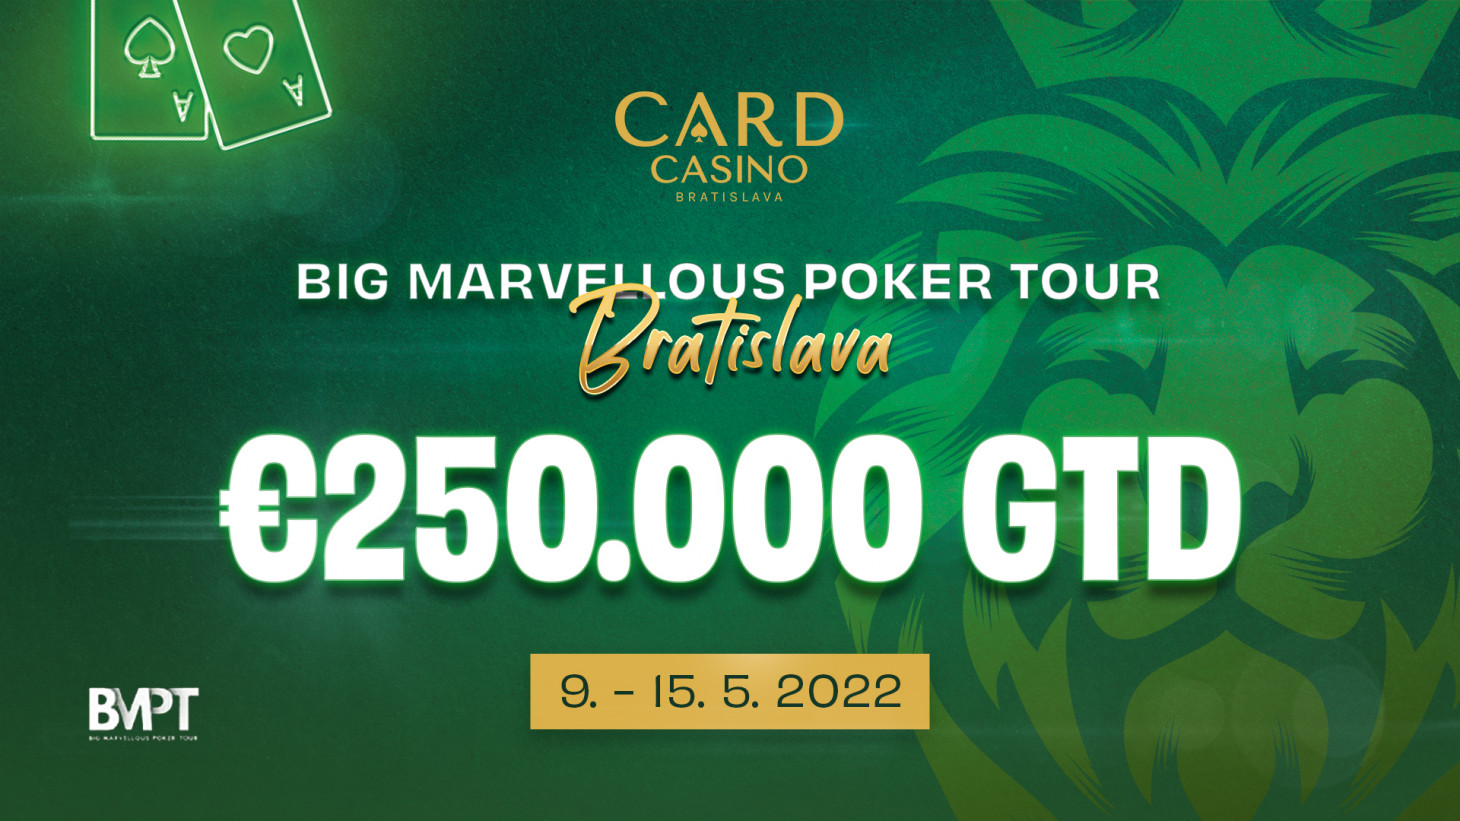 The Big Marvellous kicks off next week with a €150,000 Main Event and an exclusive PLO High Roller 100.000€!